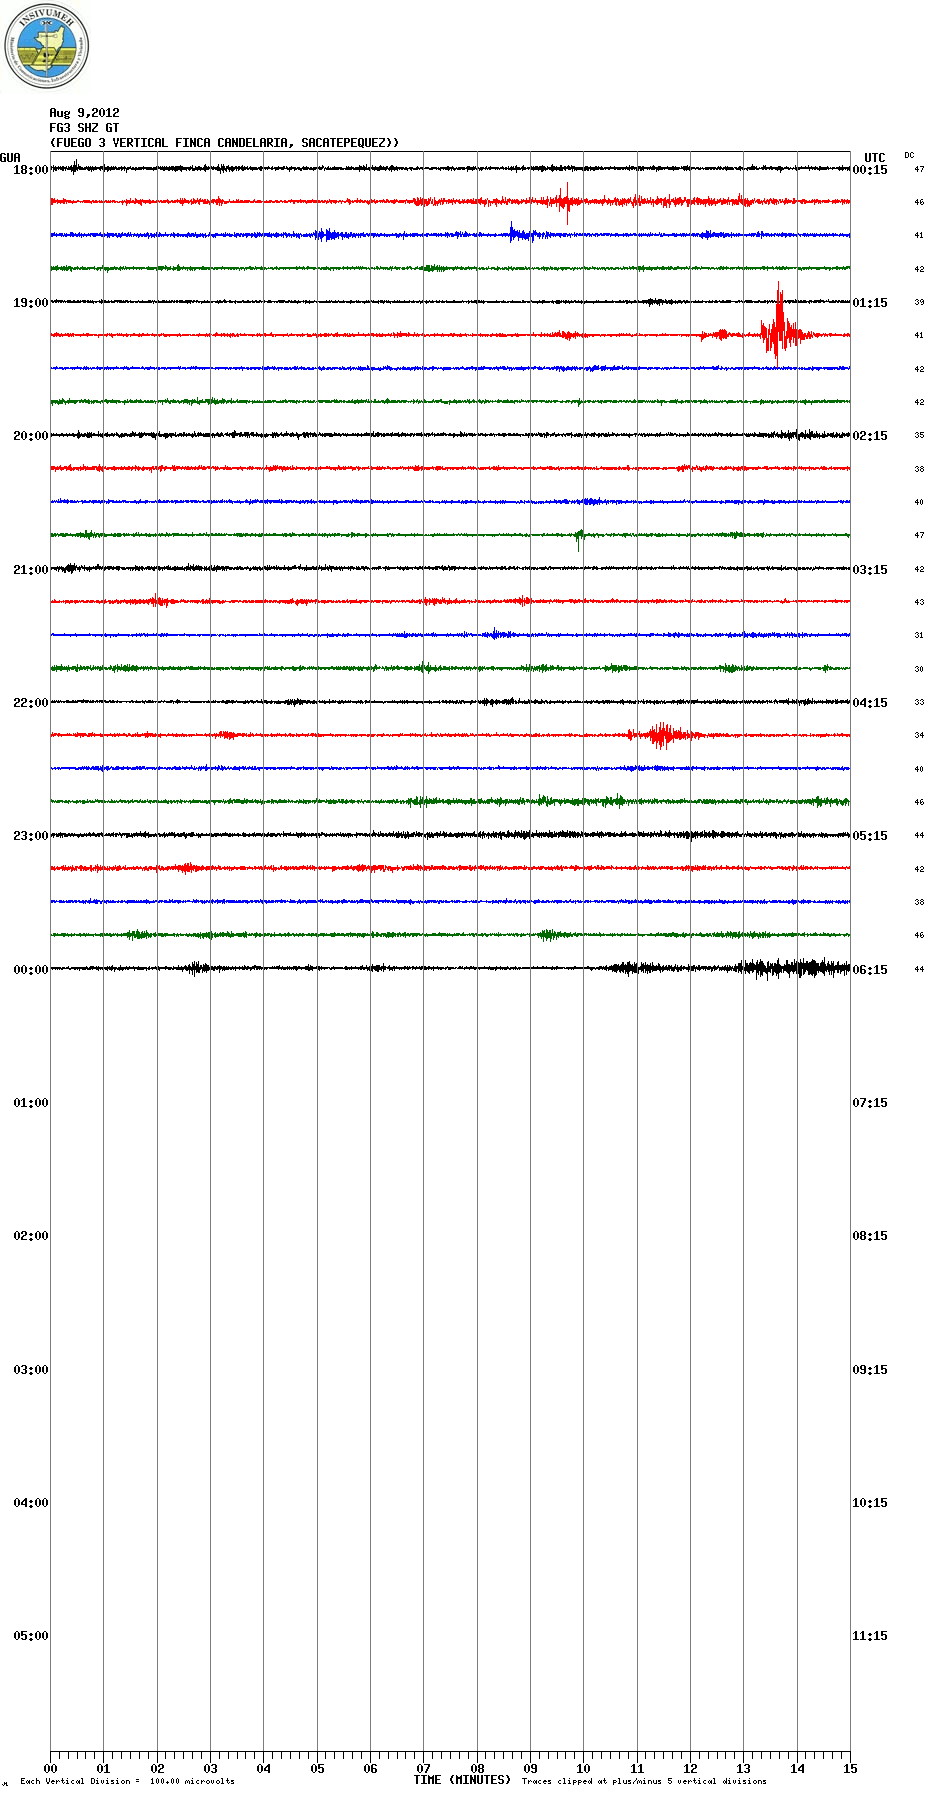 Current seismic signal from Fuego (FG3 station)